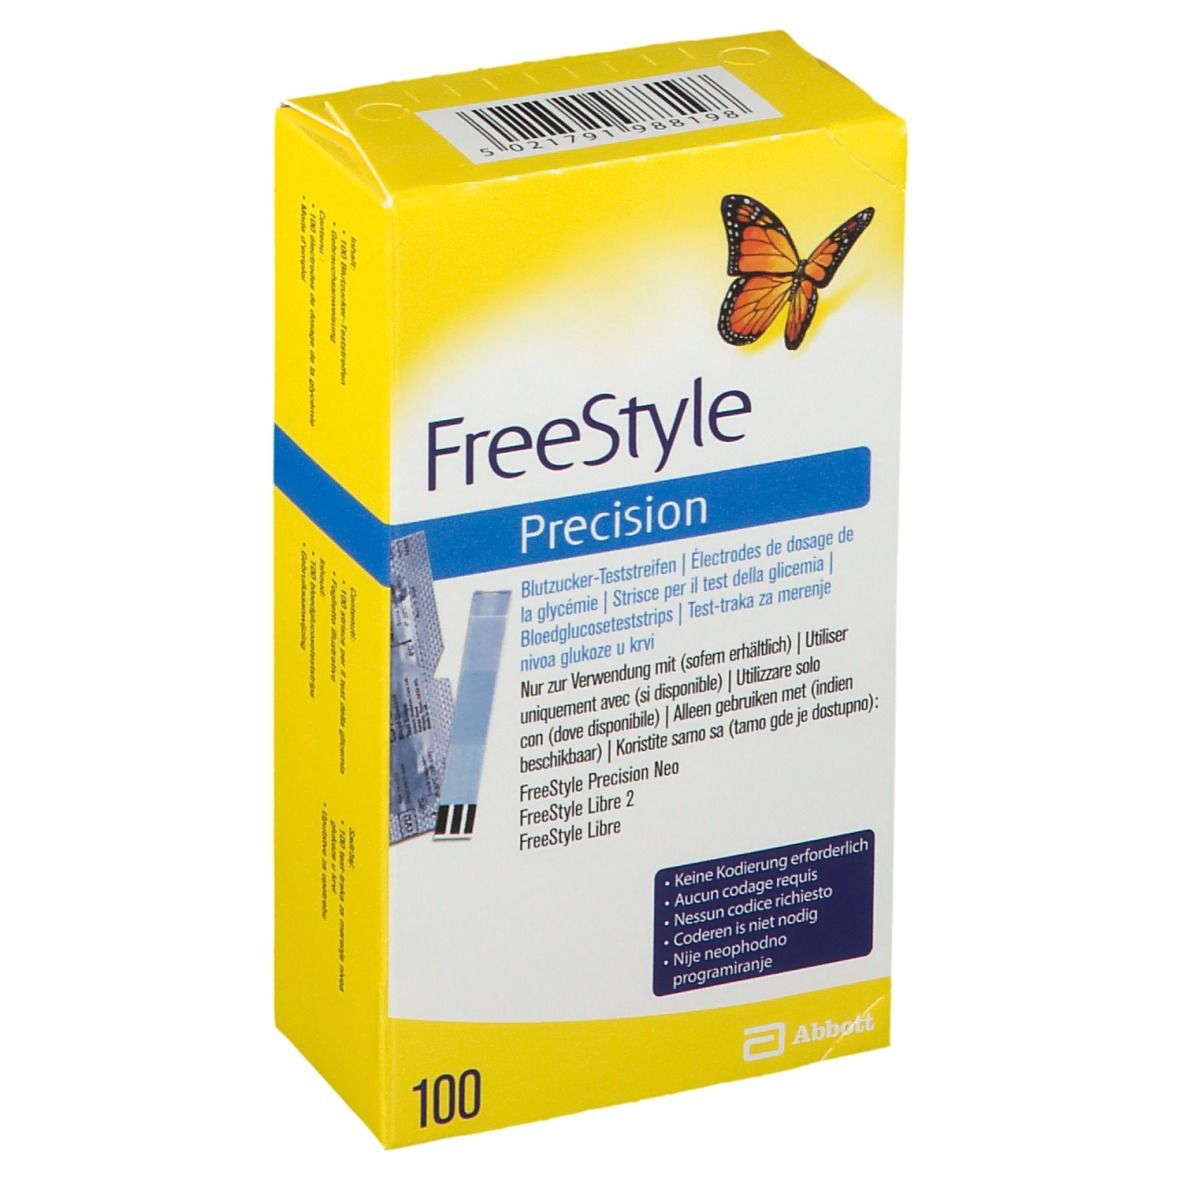 Freestyle Precision blood sugar test strips without coding